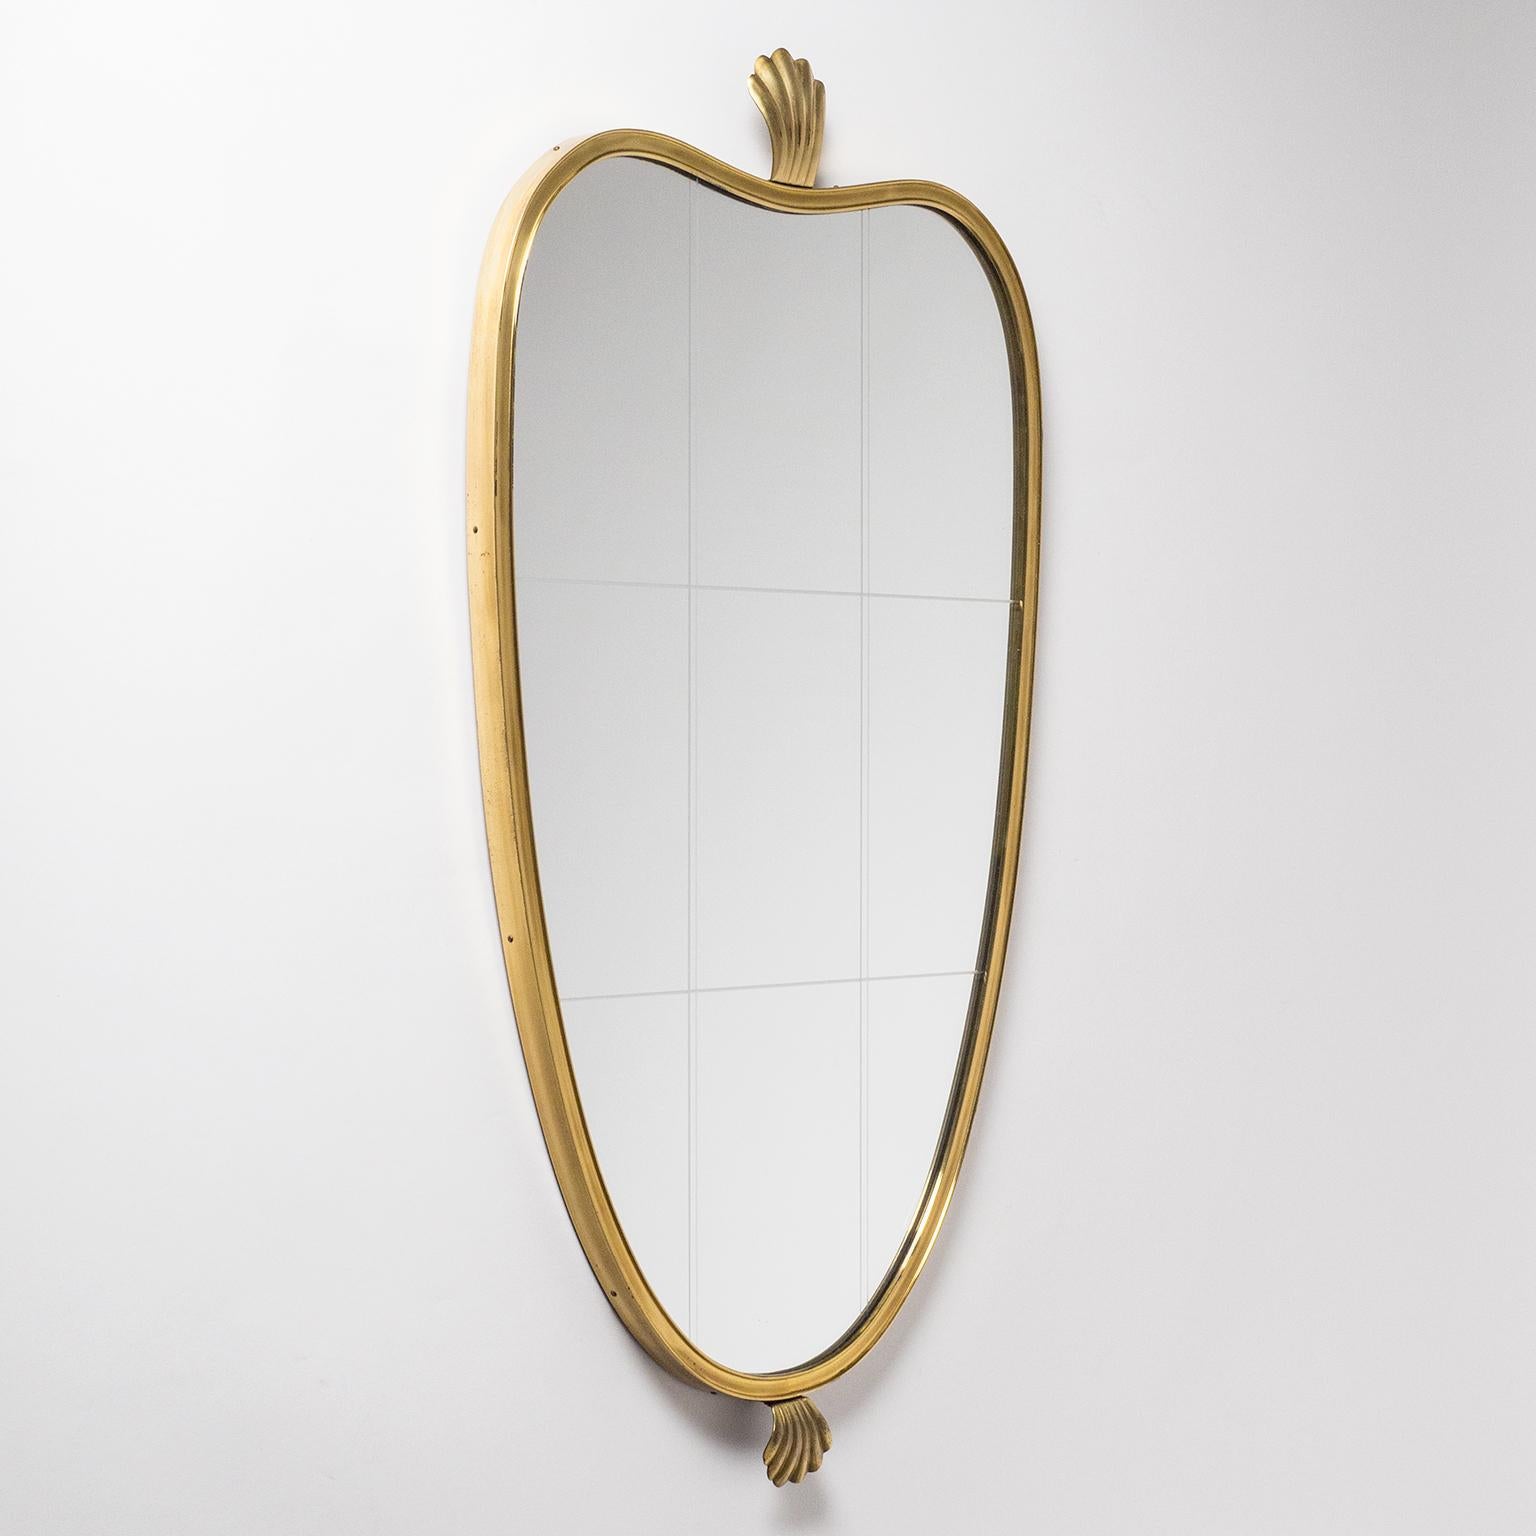 Beautiful midcentury heart shaped brass mirror with 'shell' finials on top and bottom. The original mirror has a large grid etched on the surface. Produced circa 1950 this mirror is in wonderful original condition with a light patina on the brass.